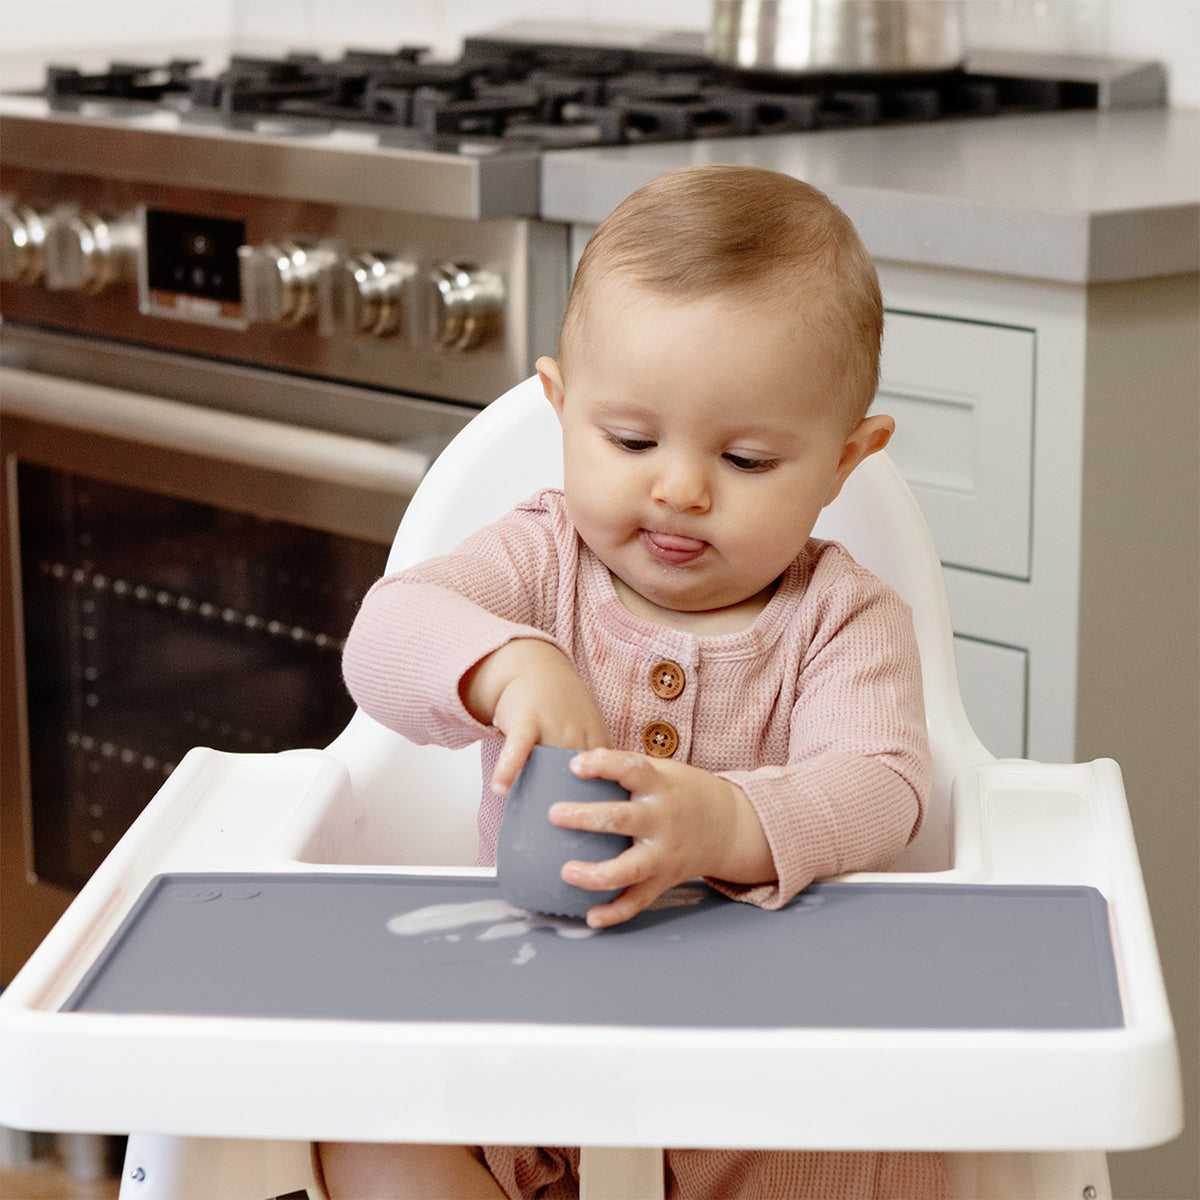 The Tiny Placemat in Gray is a non-slip, silicone placemat that fits on most highchair trays